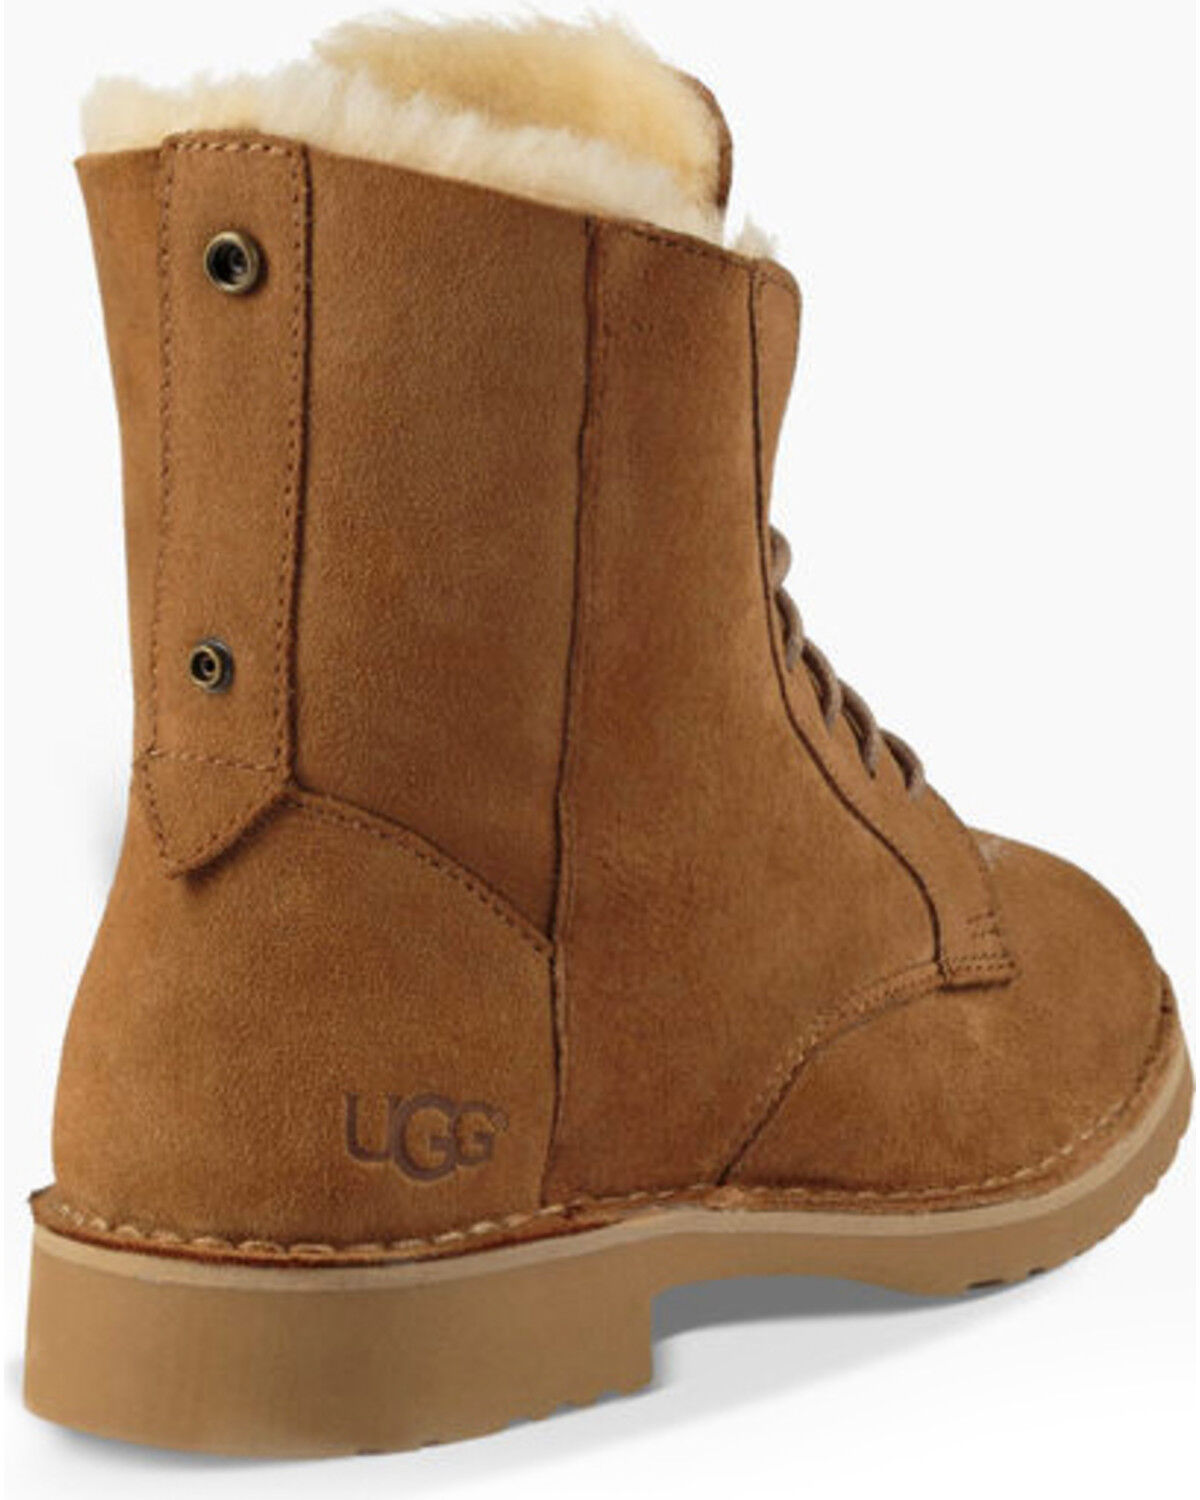 ugg water resistant slippers